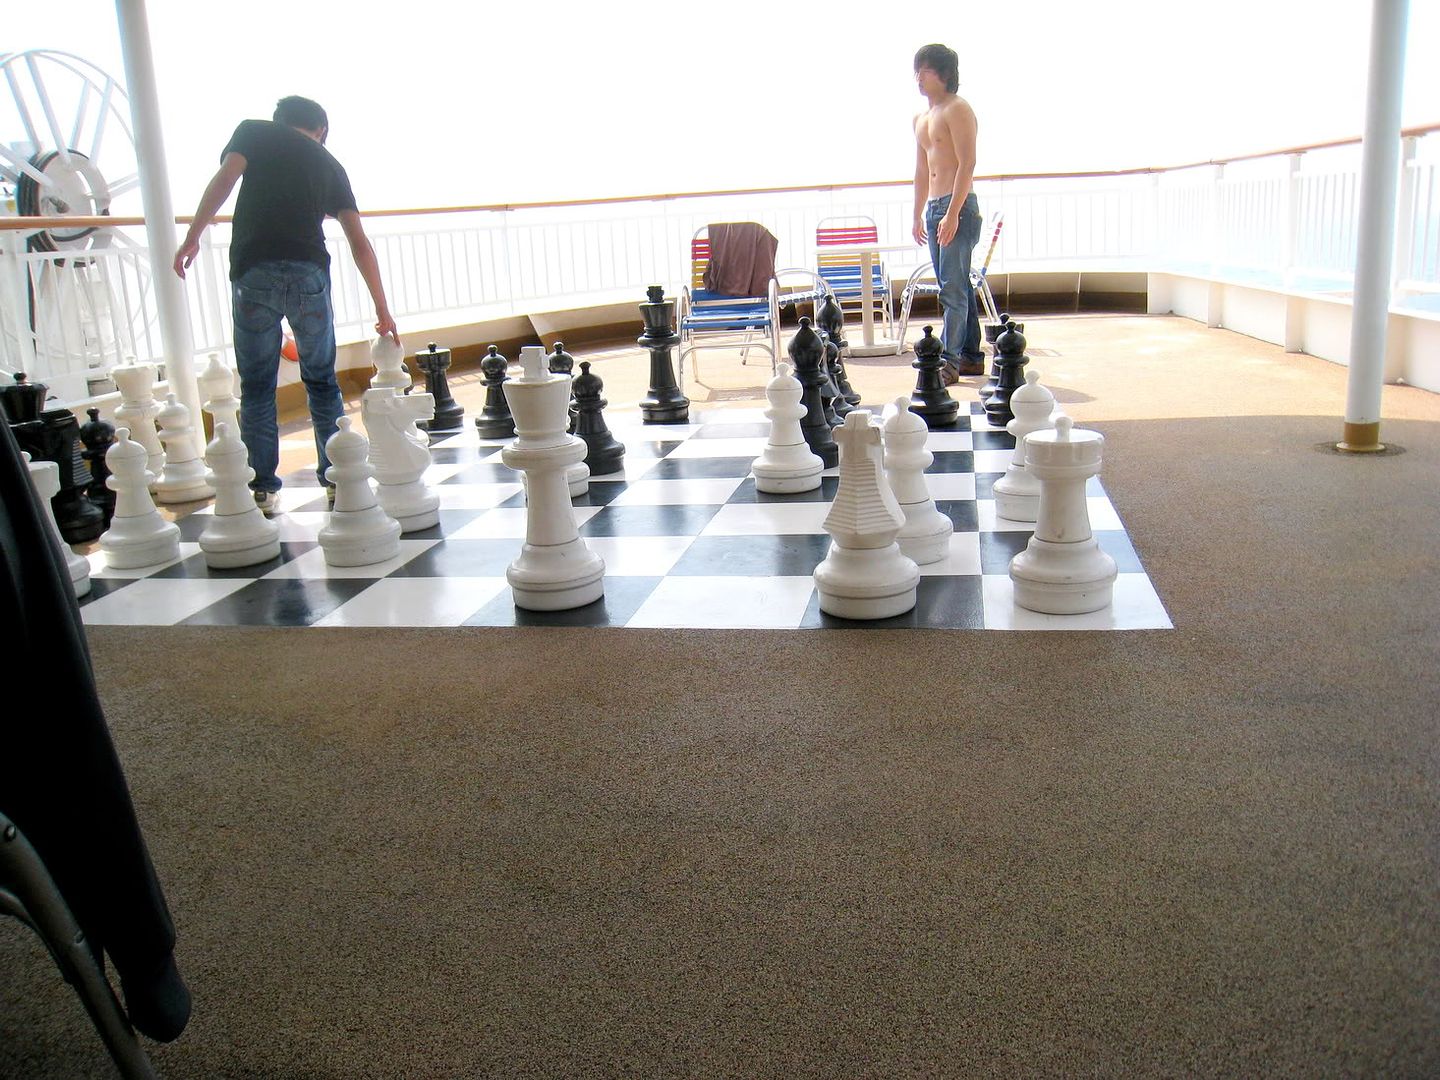 Playing The Big Chess